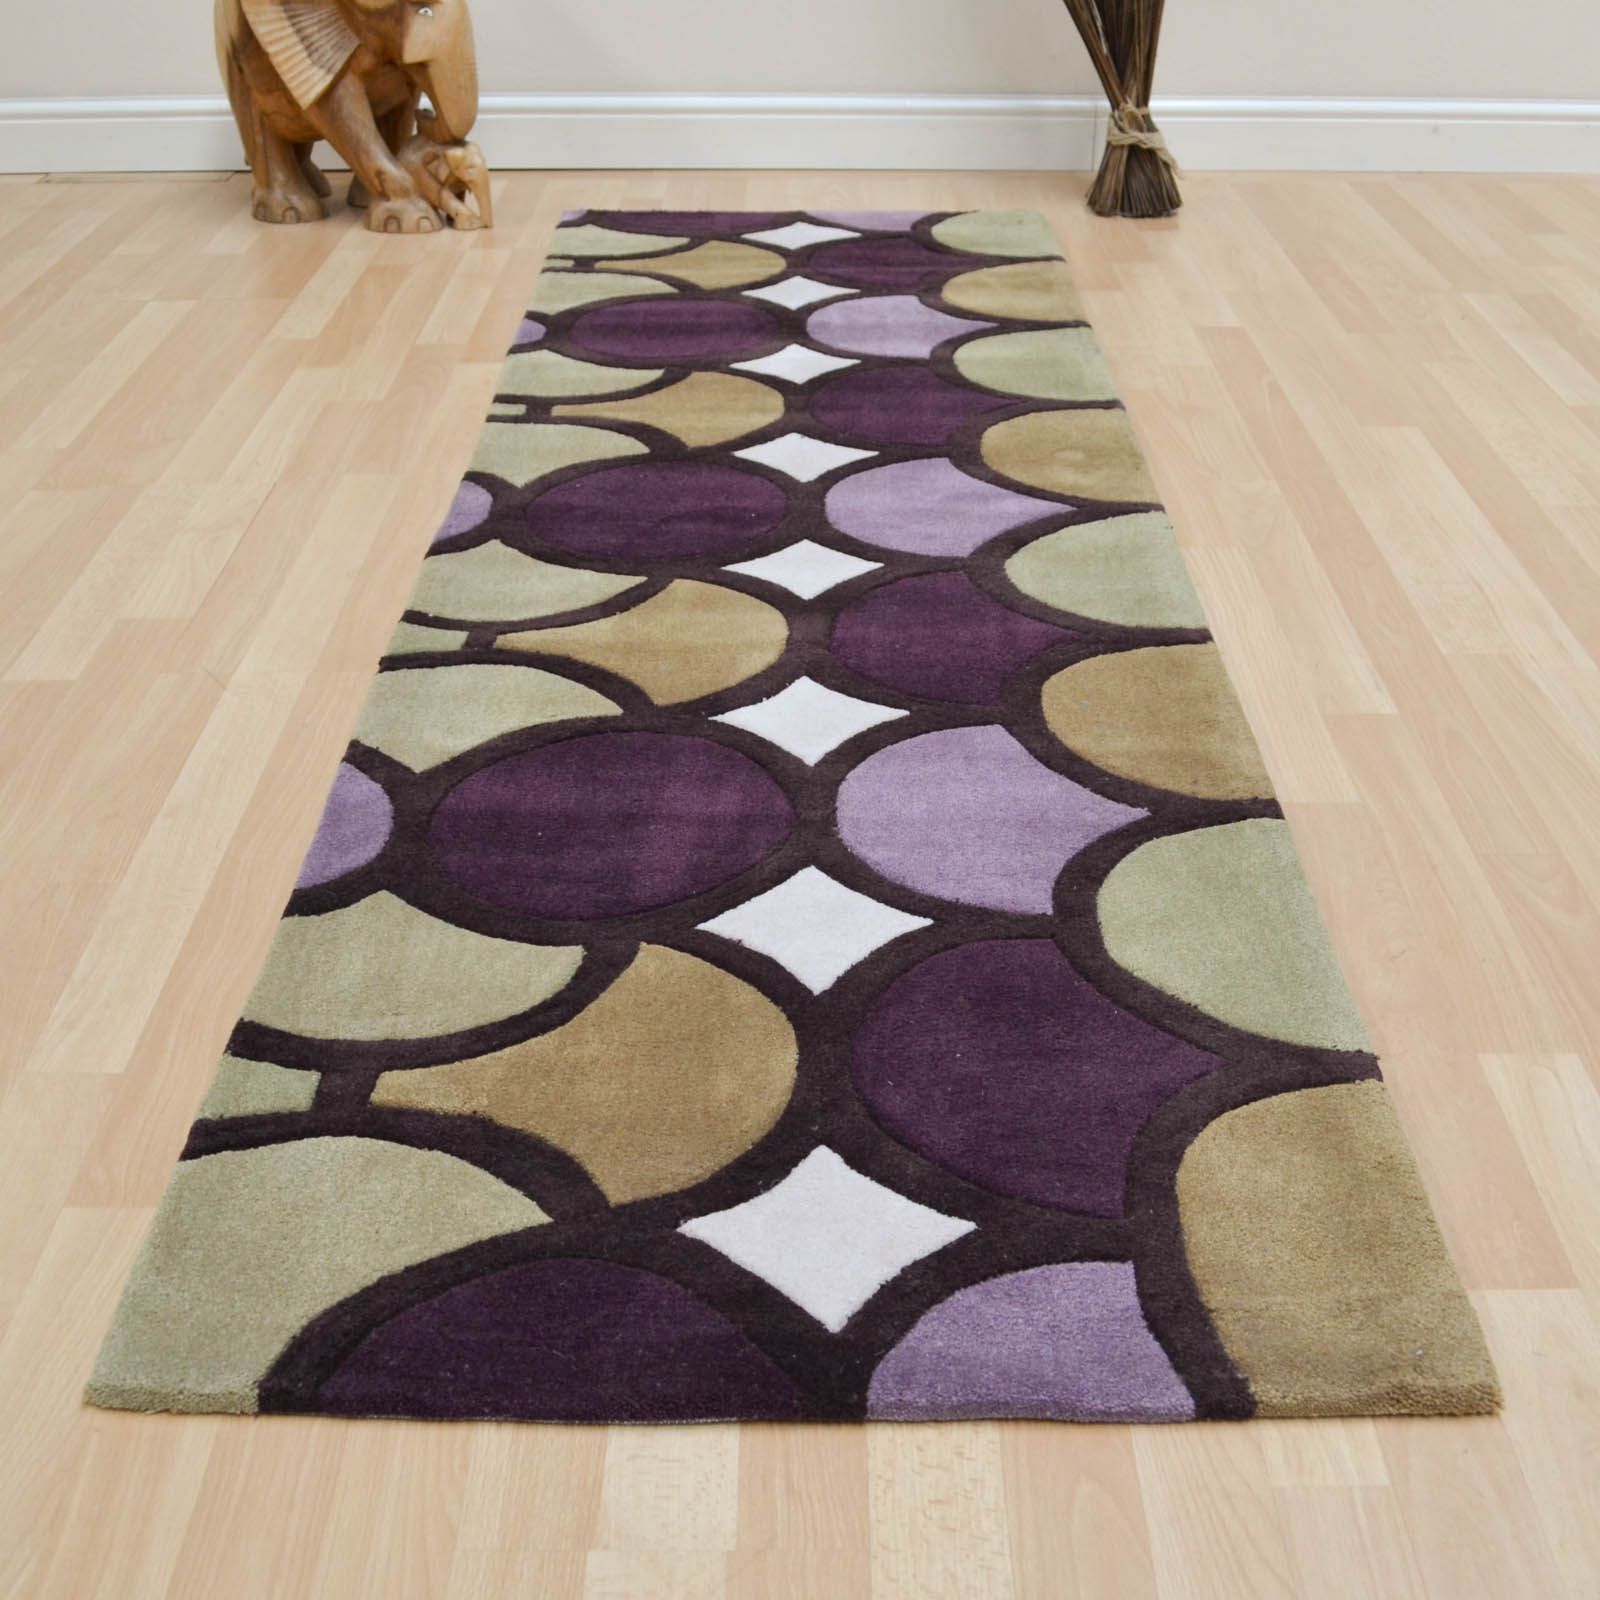 Cozy Hallway Runner Rugs Uk 100 Hallway Runner Rugs Uk Very Long Intended For Hall Runners And Matching Rugs (Photo 4 of 20)